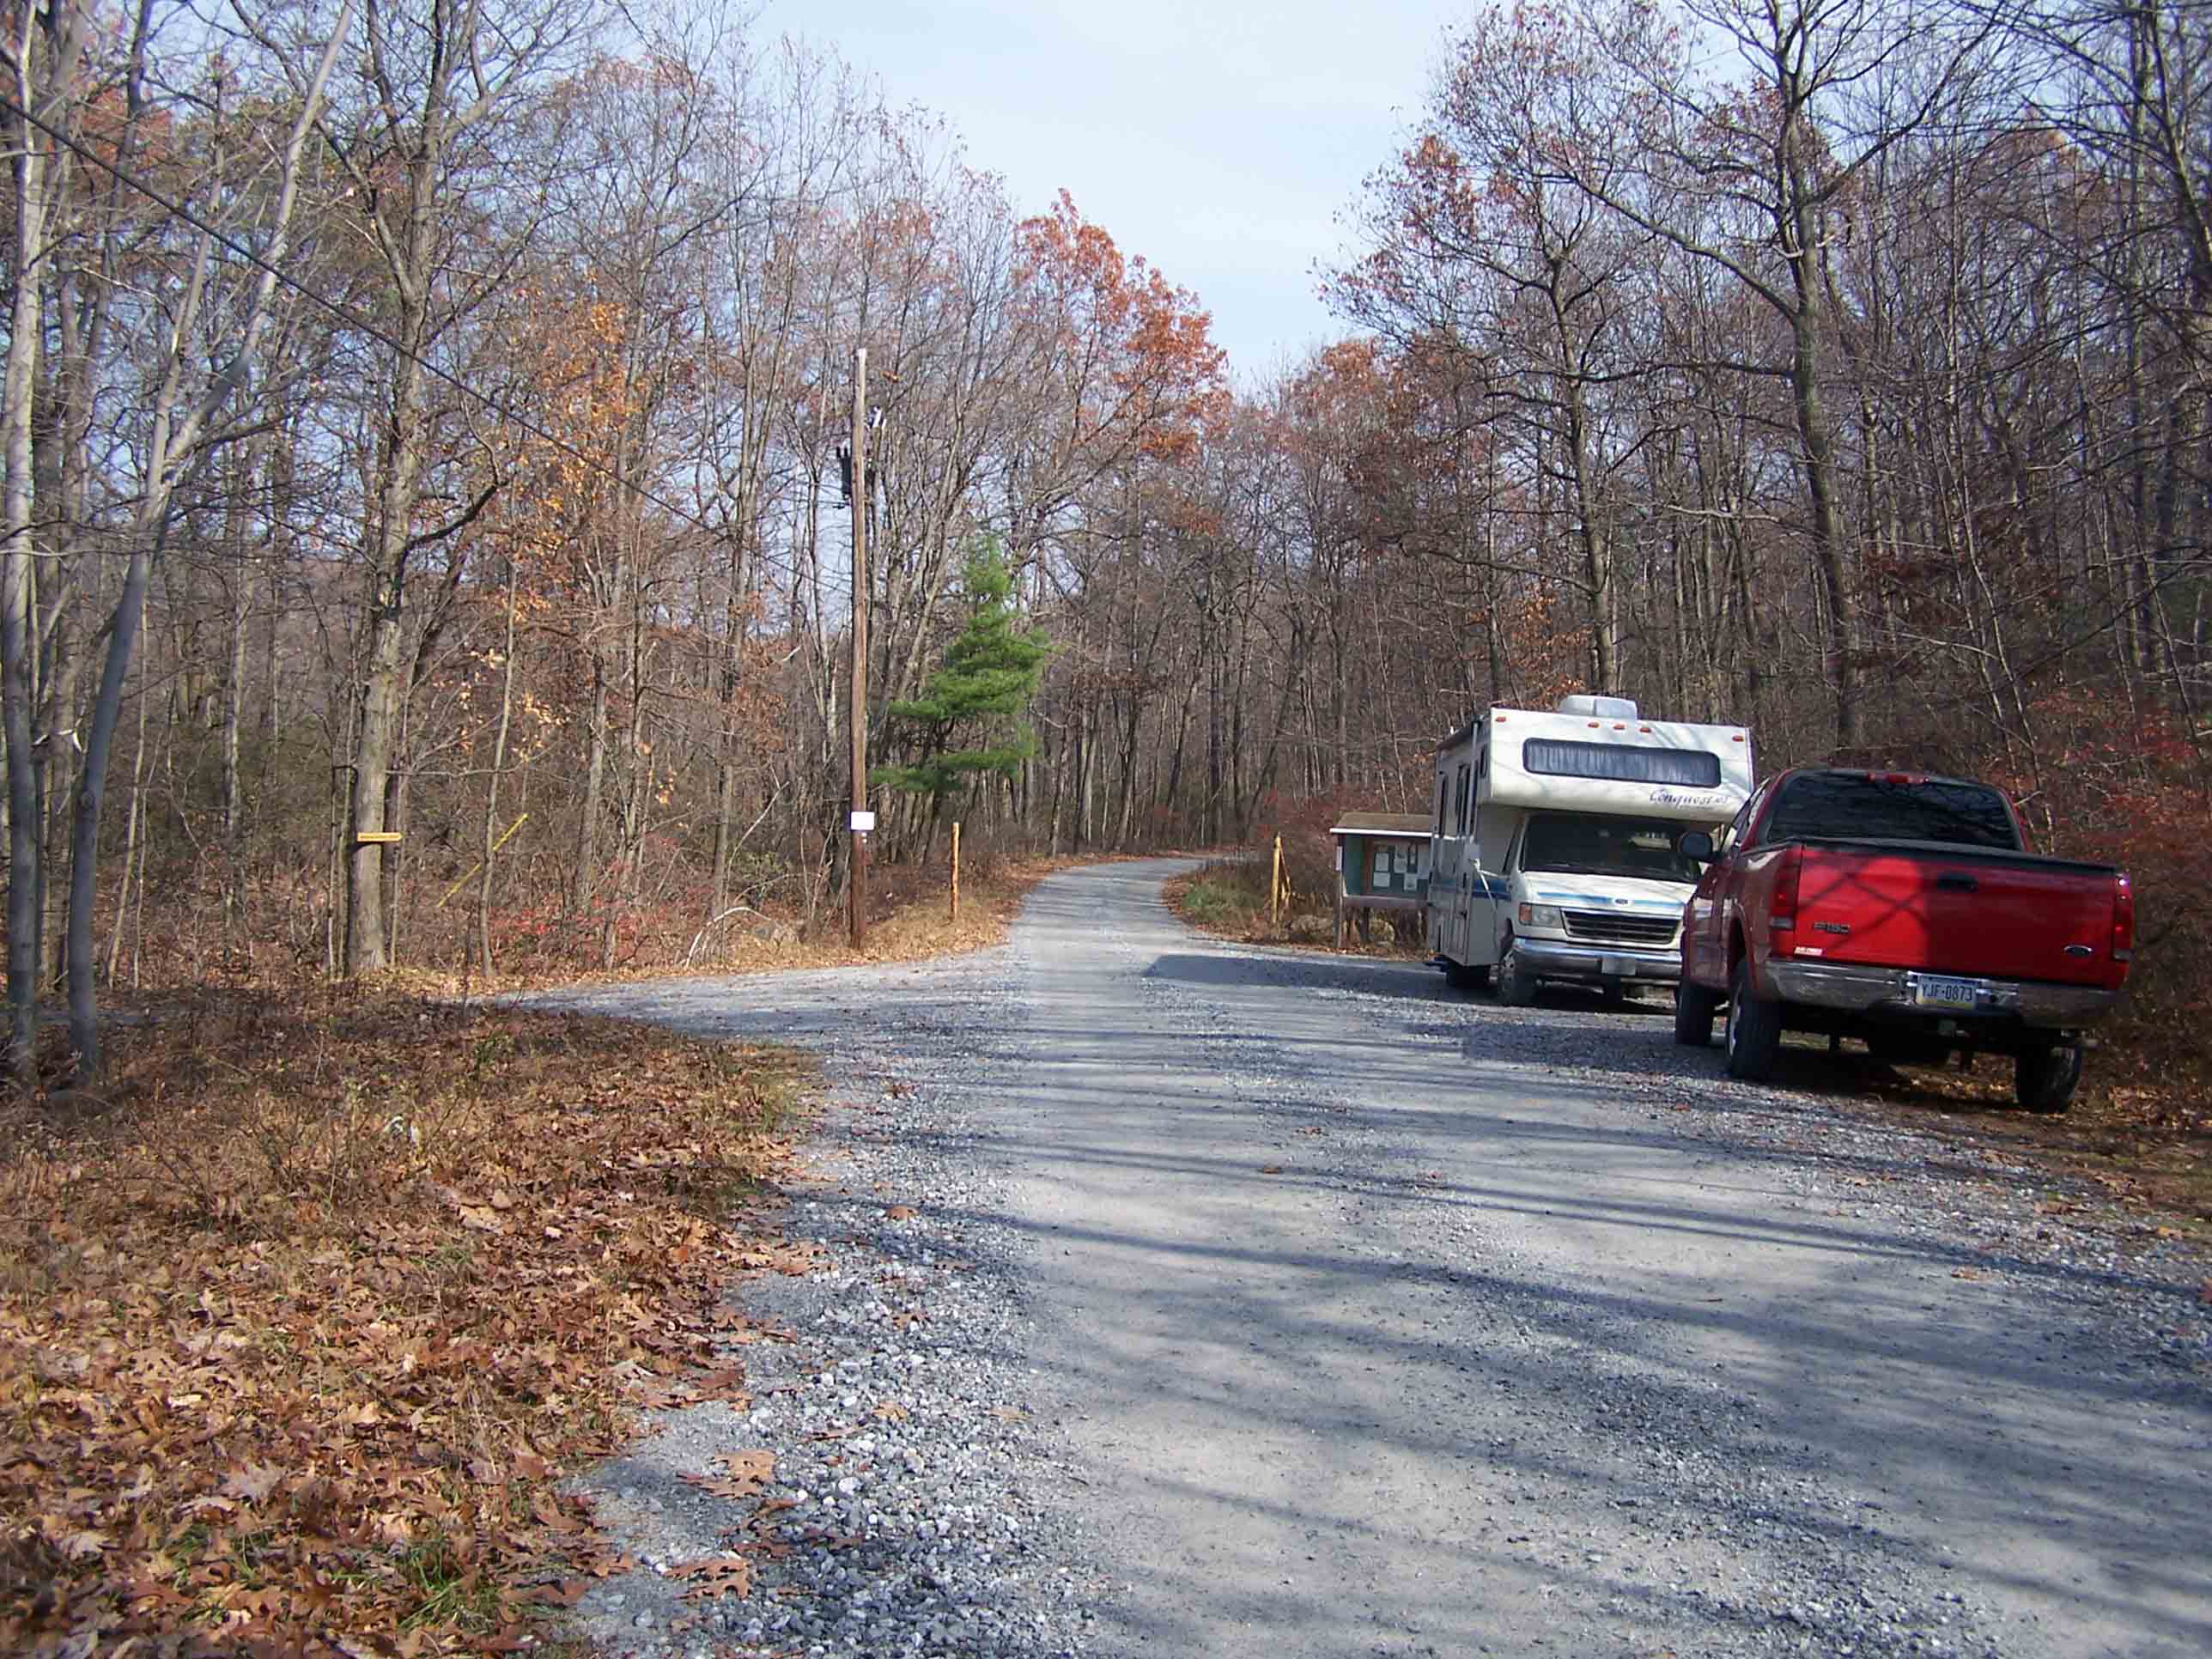 mm 3.4 - Parking on Mohican Camp Road. This is the closest parking to the trail crossing. Courtesy at@rohland.org